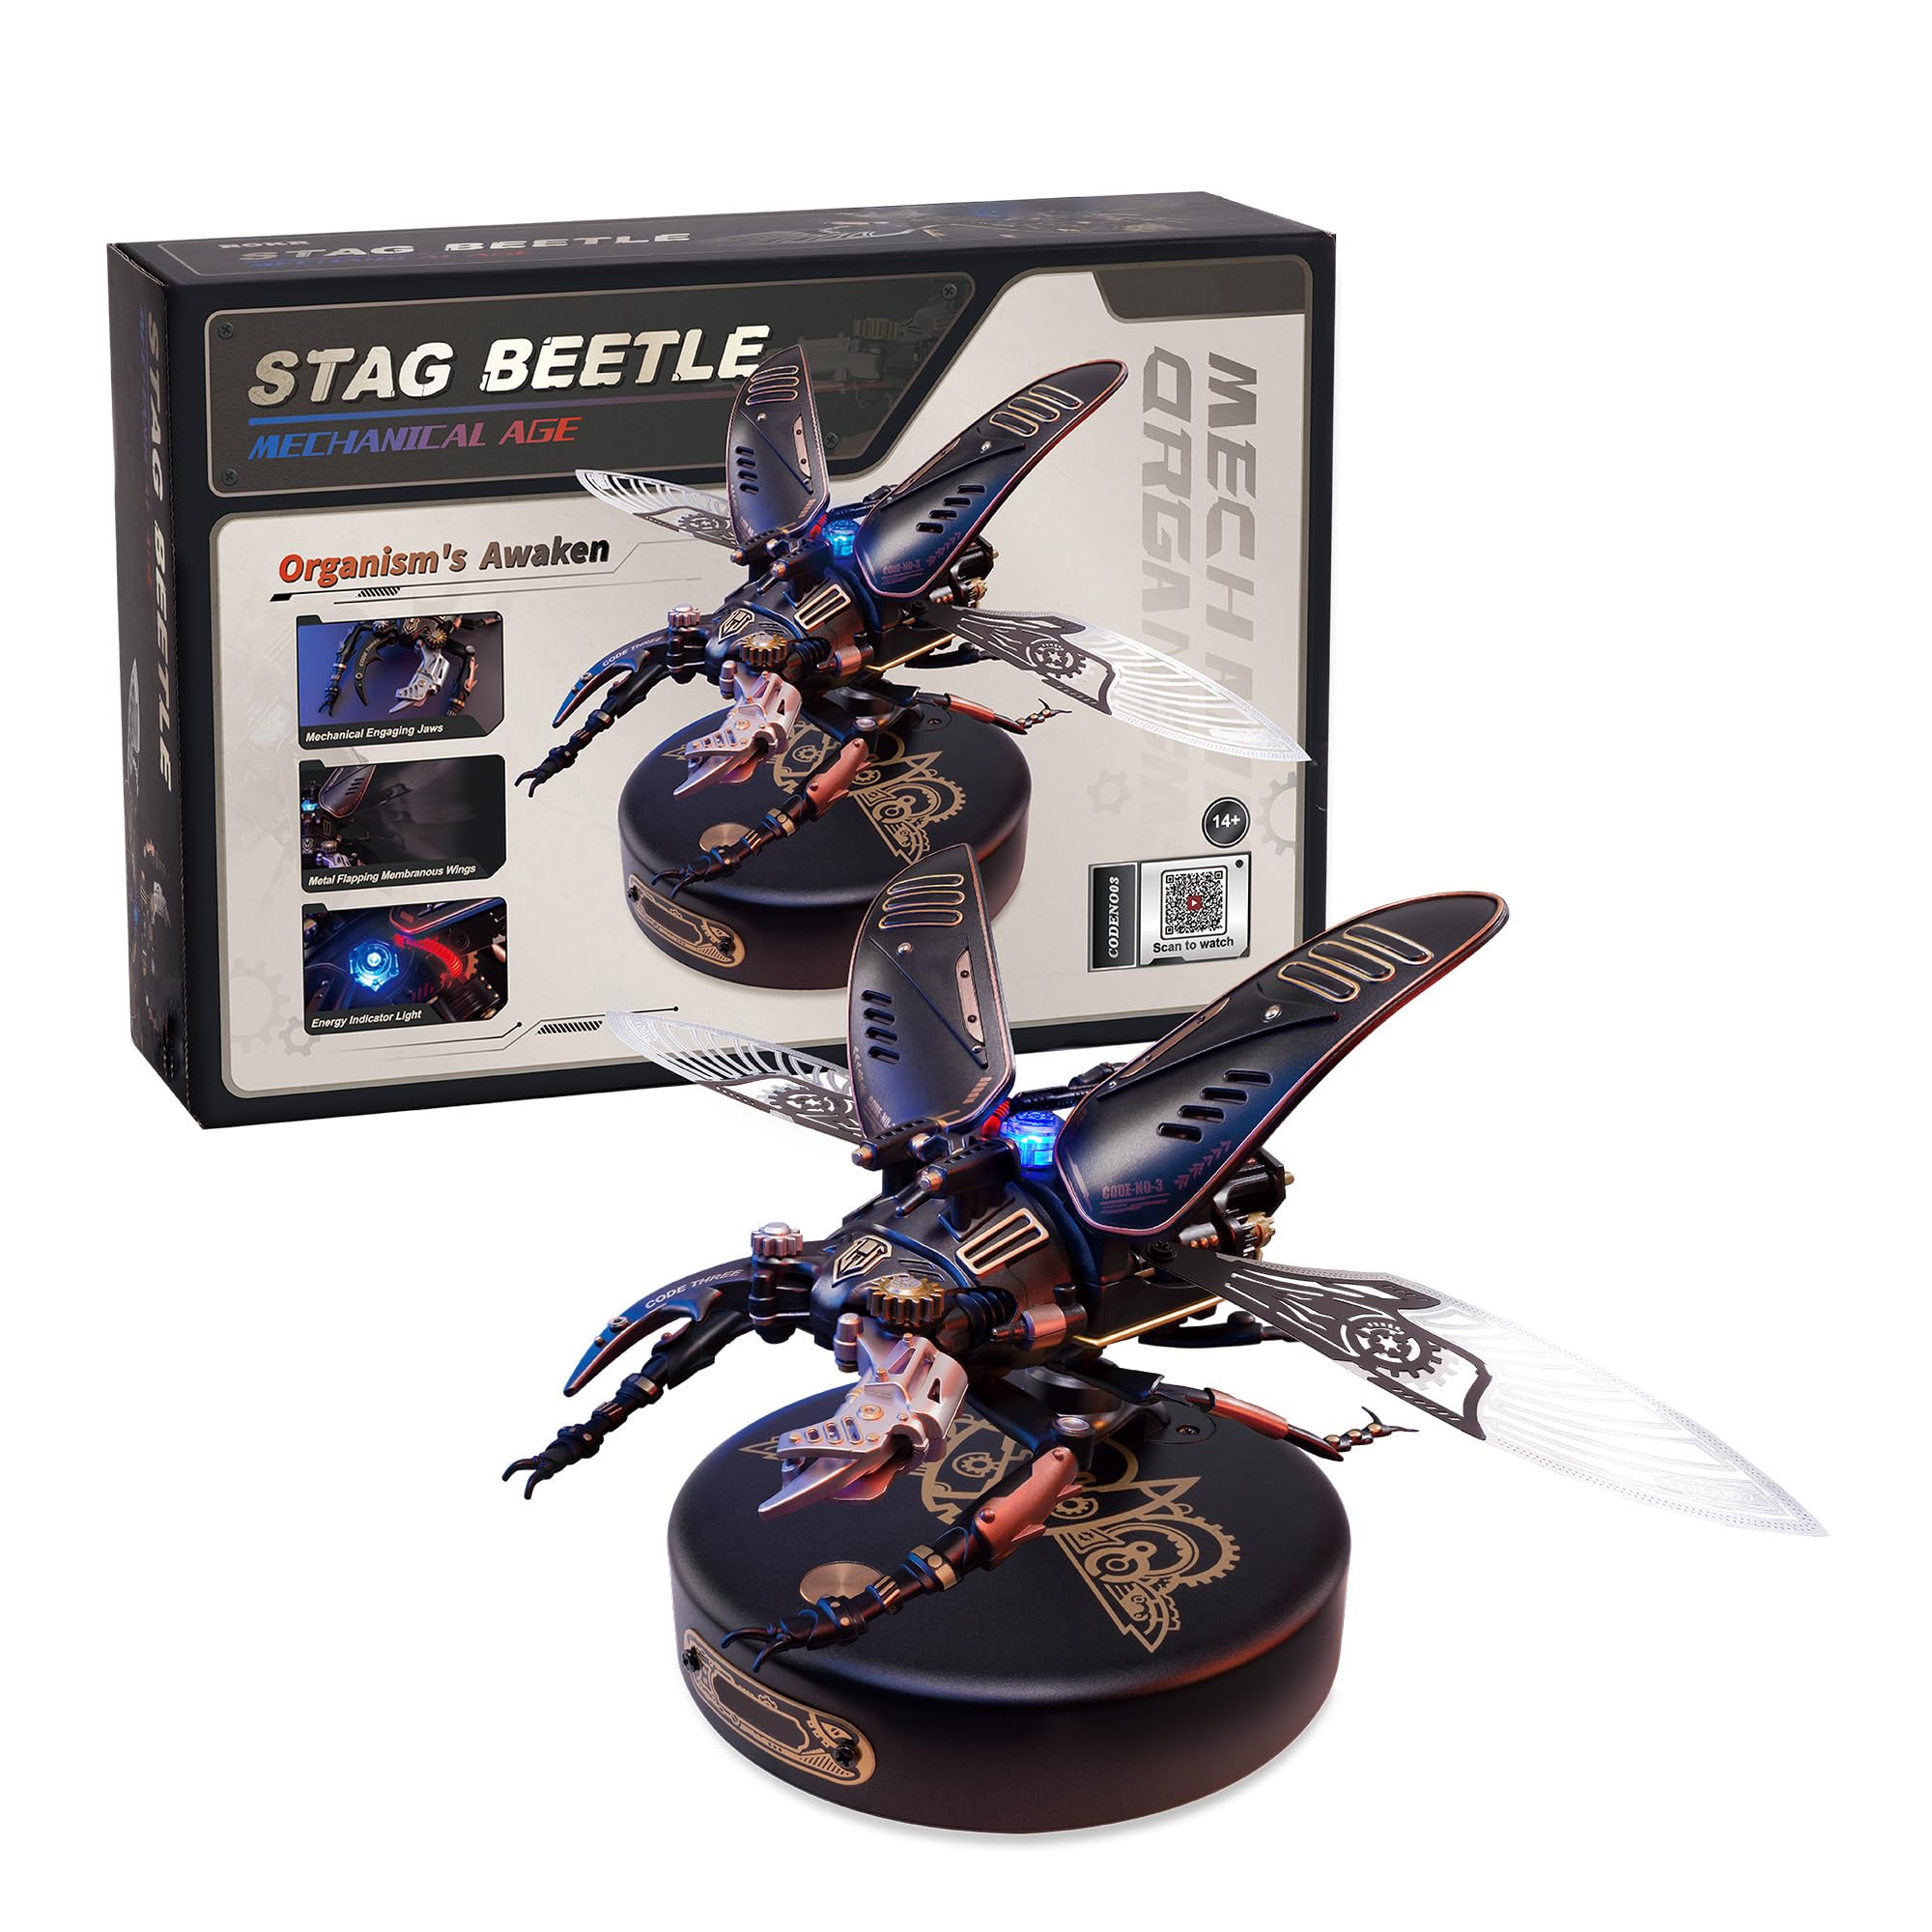 115-Pc 3D Metal & ABS Mechanical Puzzle Model Kit (Stag Beetle) $36 + Free Shipping